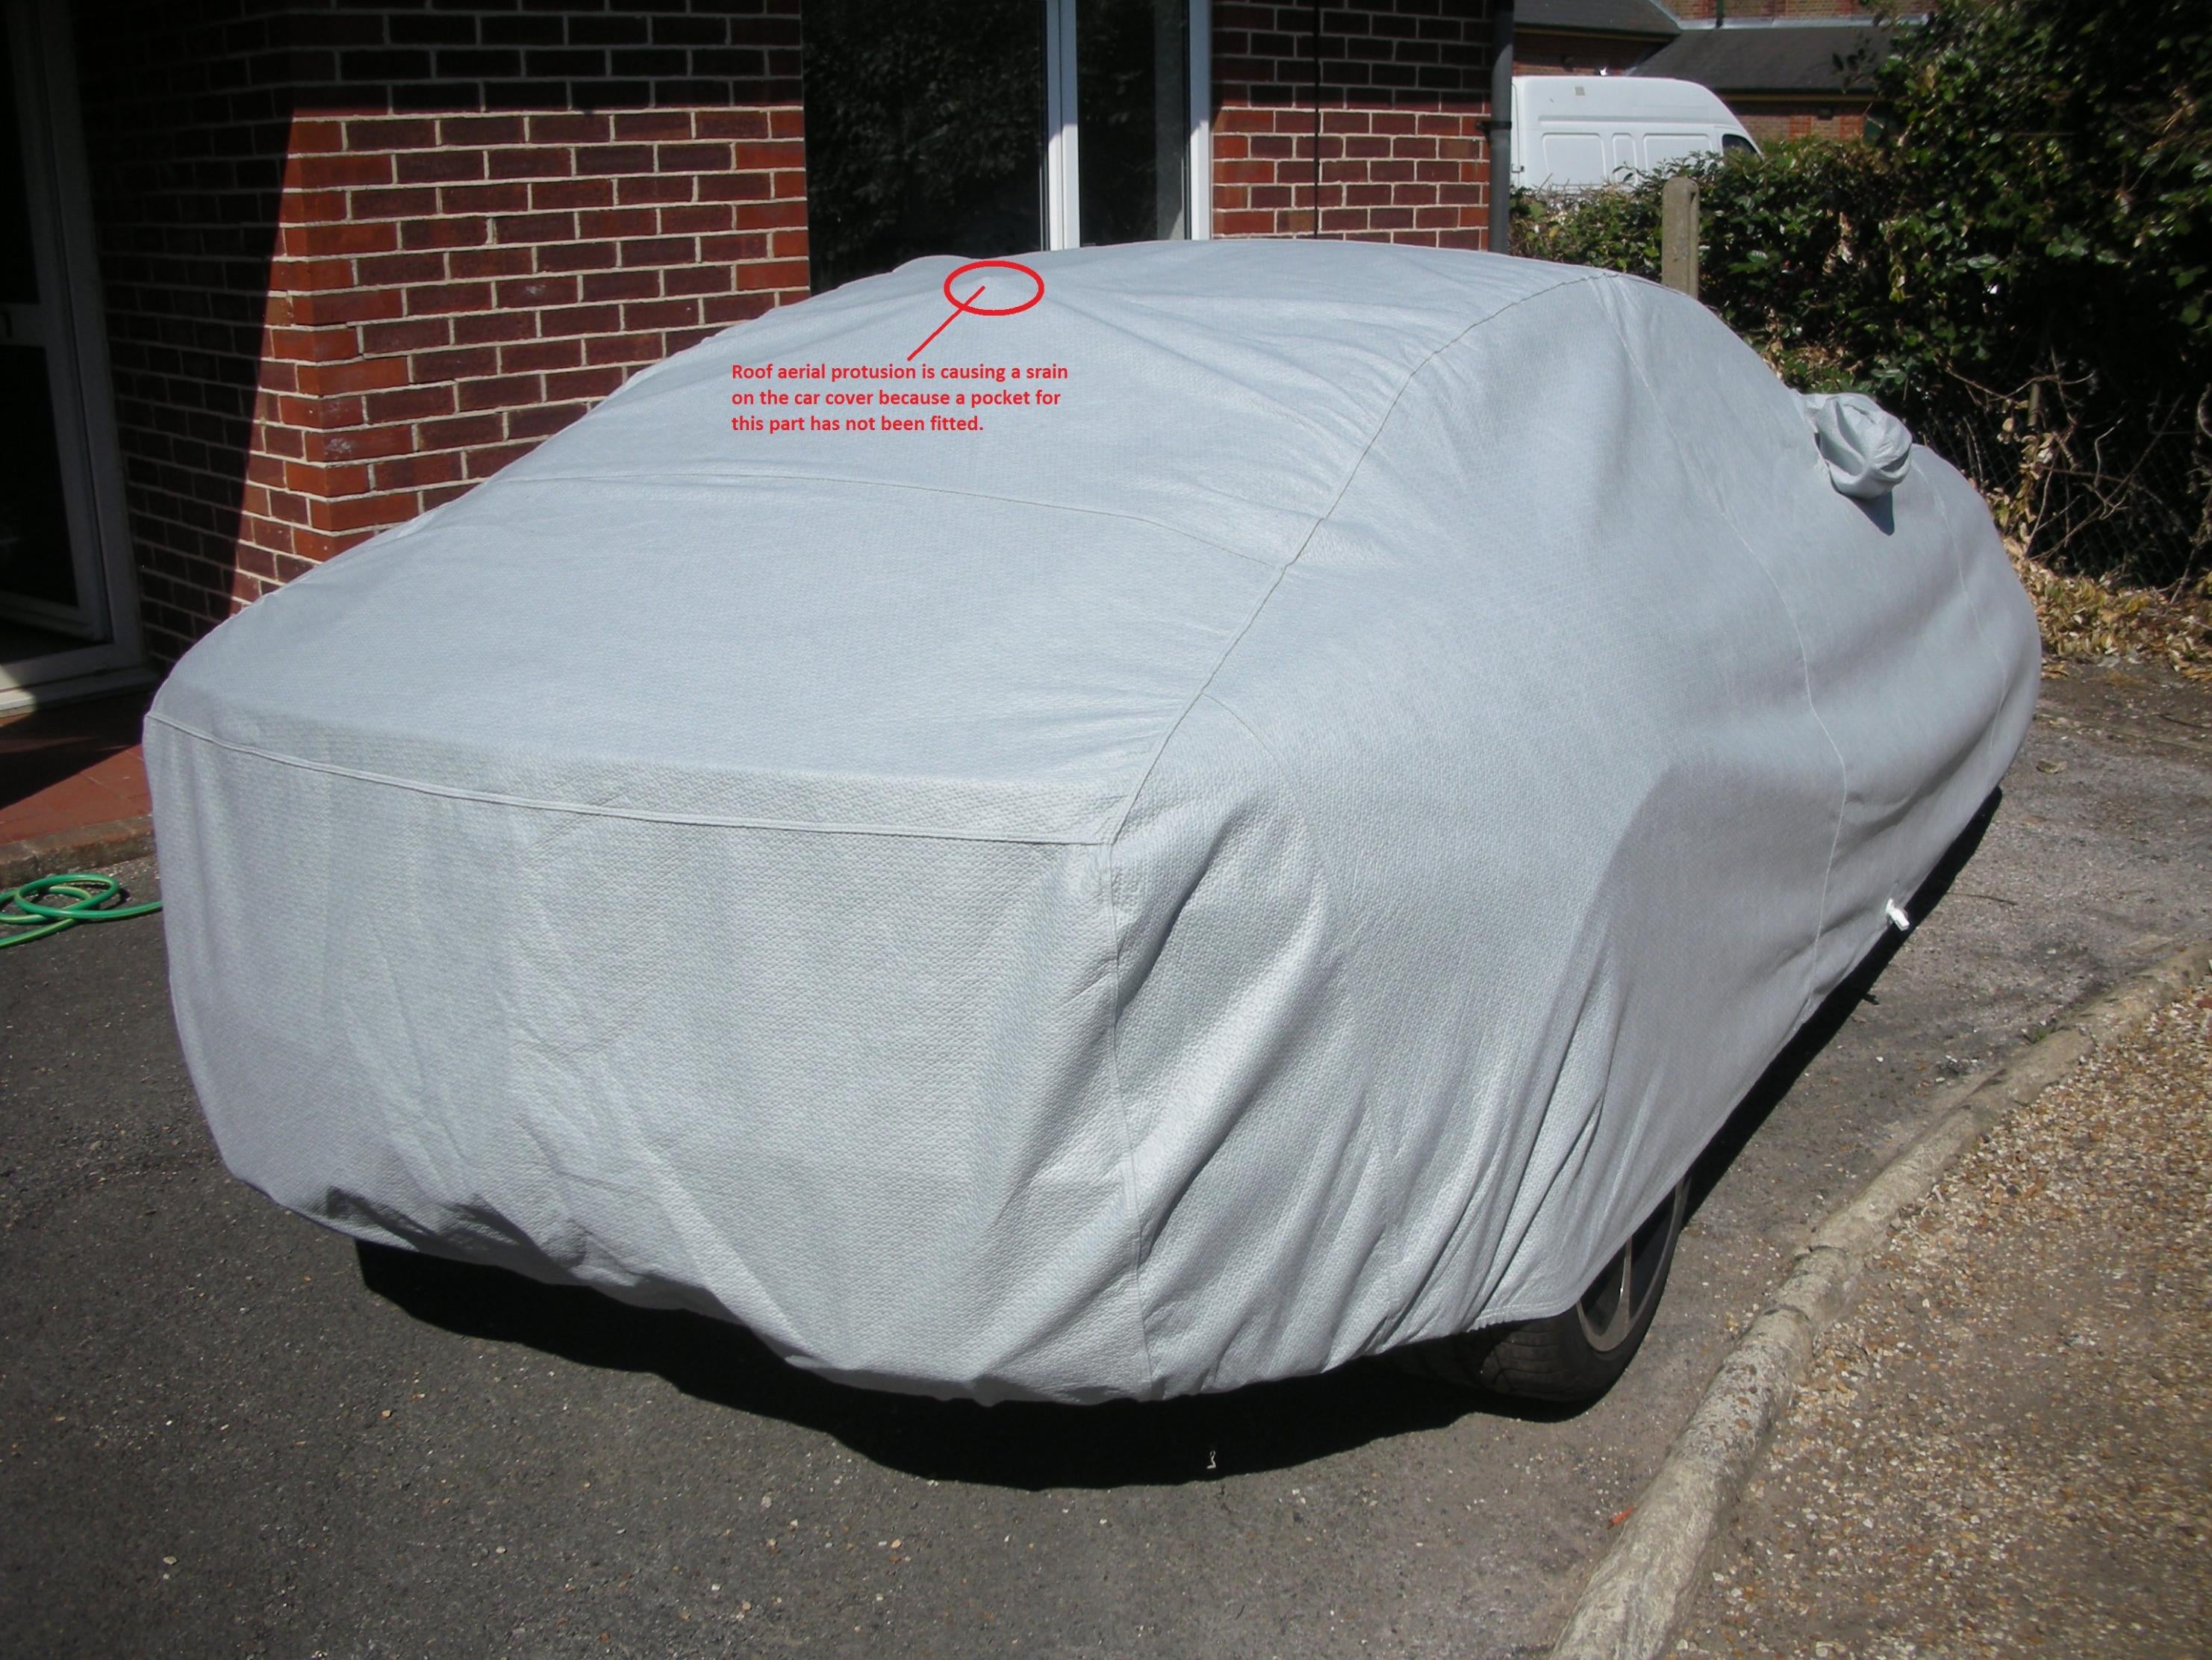 https://www.jaguarforum.com/attachments/f-type-cover-straining-at-roof-antenna-because-of-missing-pocket-jpg.22608/